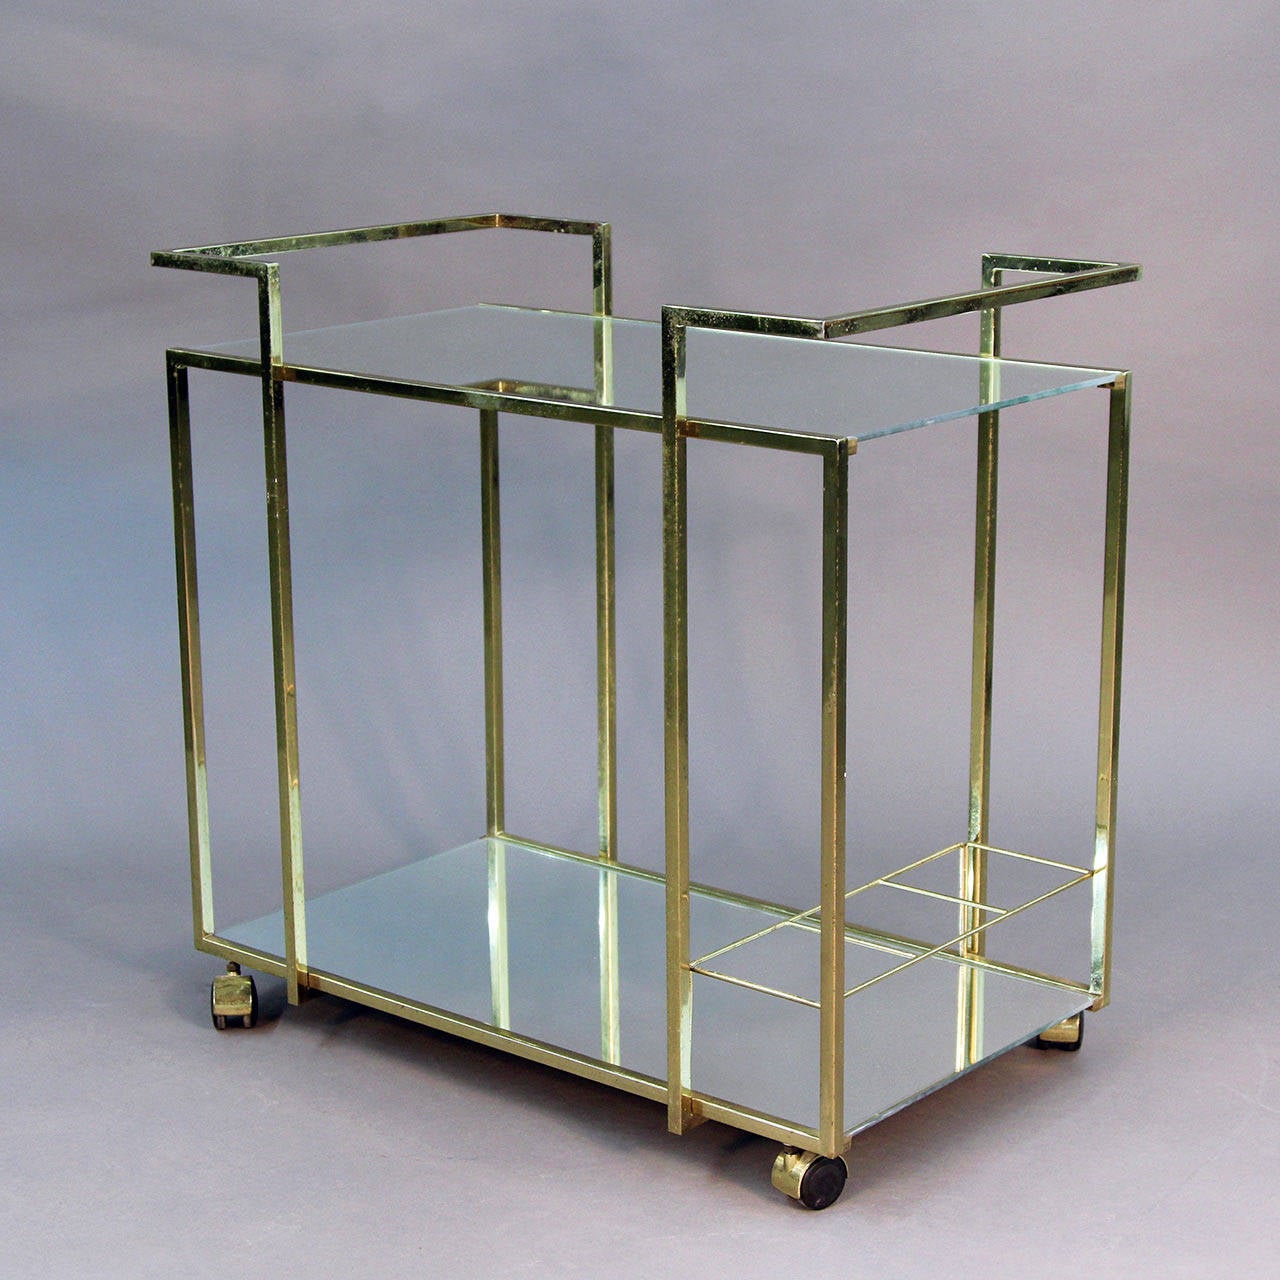 Beautiful brass bar cart with mirrored shelves in modern Hollywood Regency style. Clean lines, with bottle holders and two shelves. Beautiful addition to any Mid-Century or modern decor.